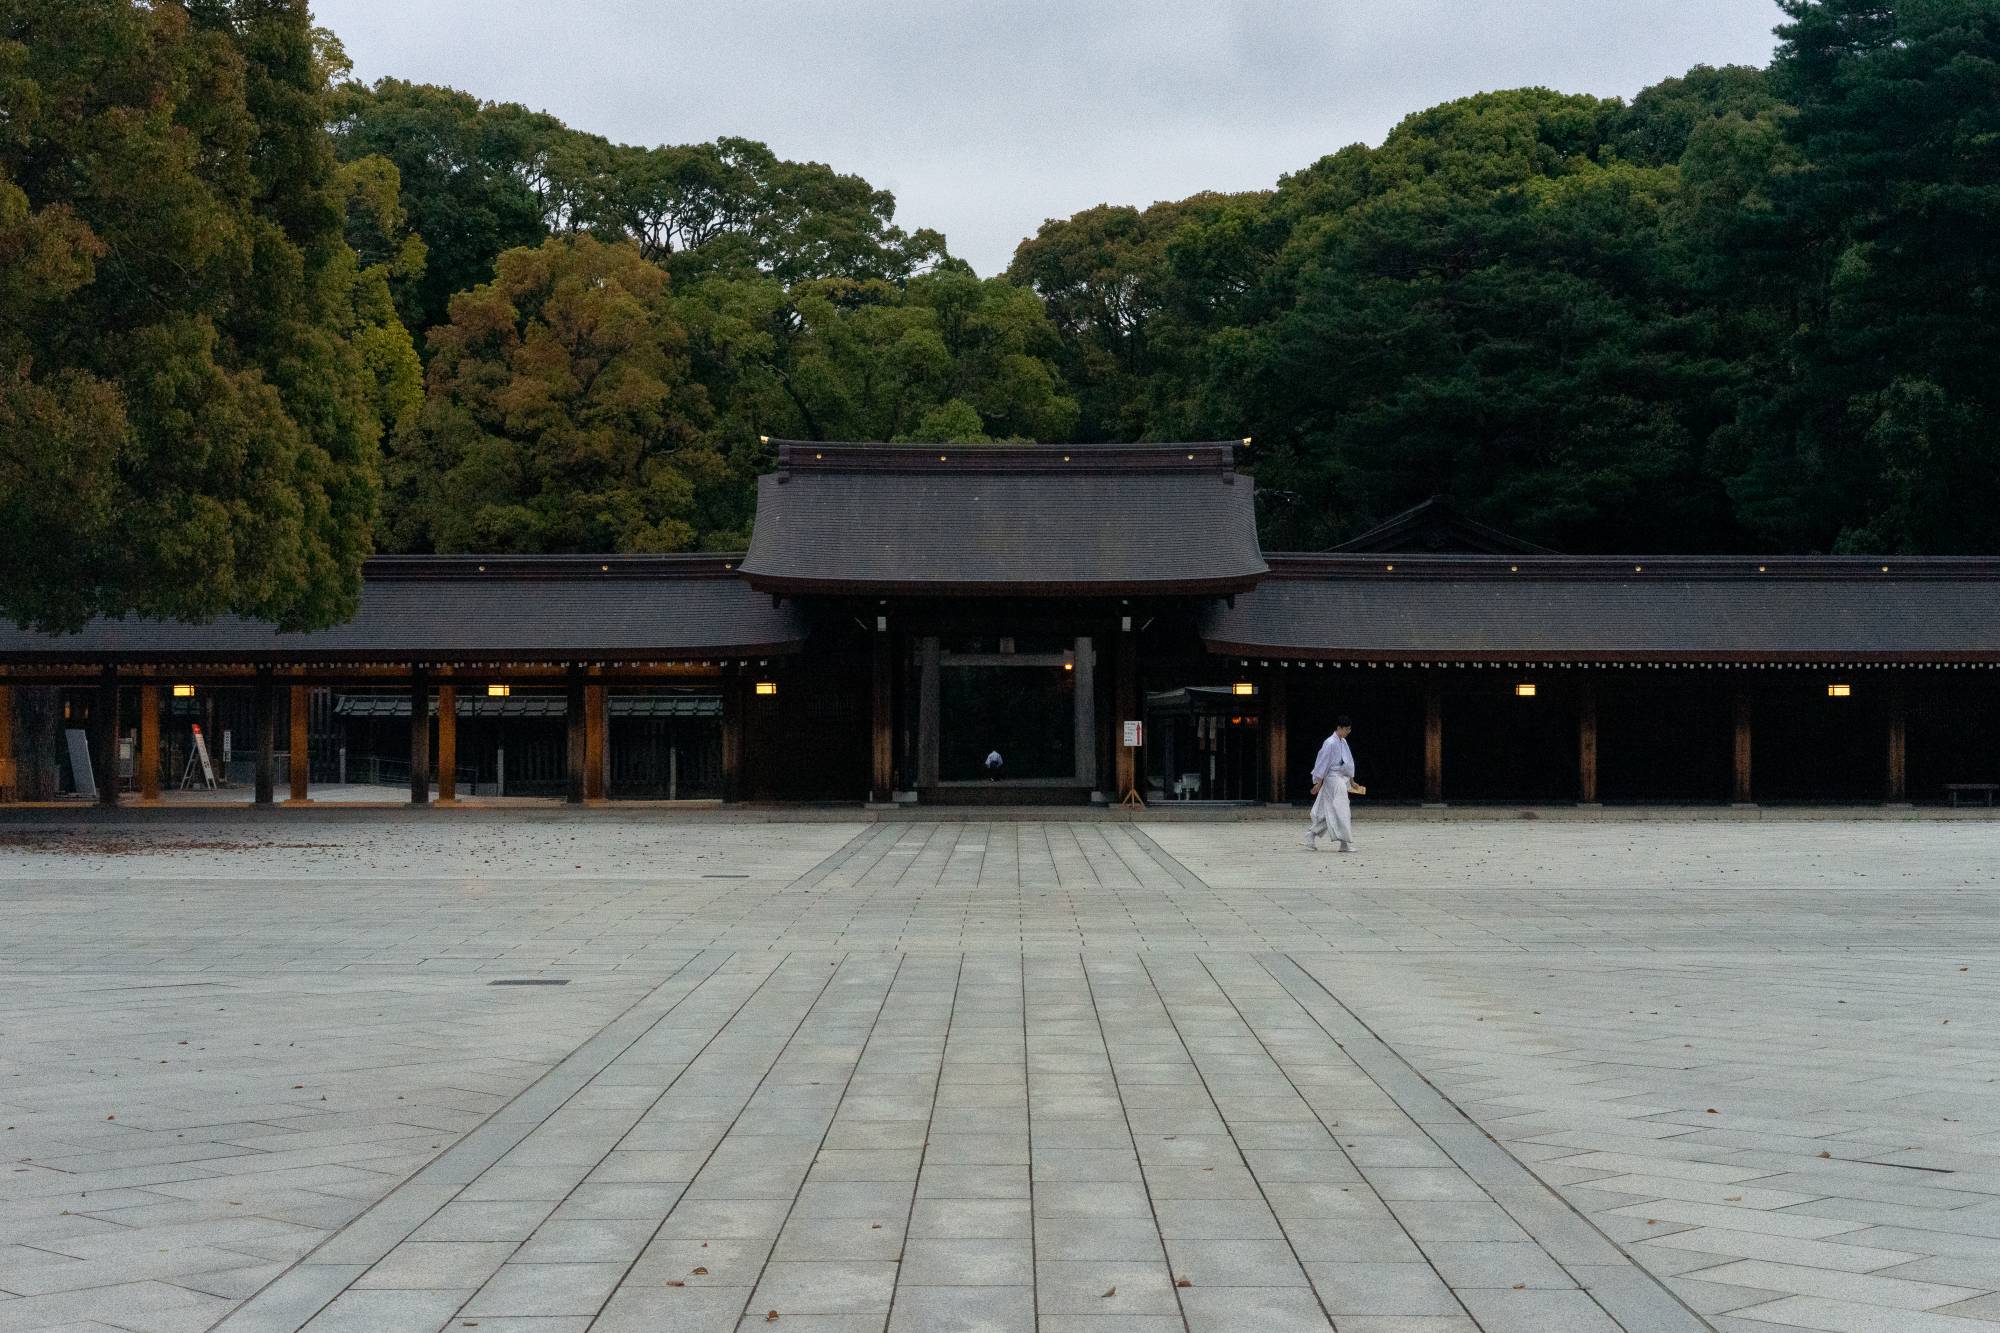 A lone monk walks through the central courtyard of Meiji Jingu, one of Tokyo’s largest shrines, dedicated to the spirits of the Meiji Emperor and Empress. Located not far from Harajuku, the shrine usually receives 3 million visitors a year. Throughout the state of emergency, it was largely deserted. | Oscar Boyd